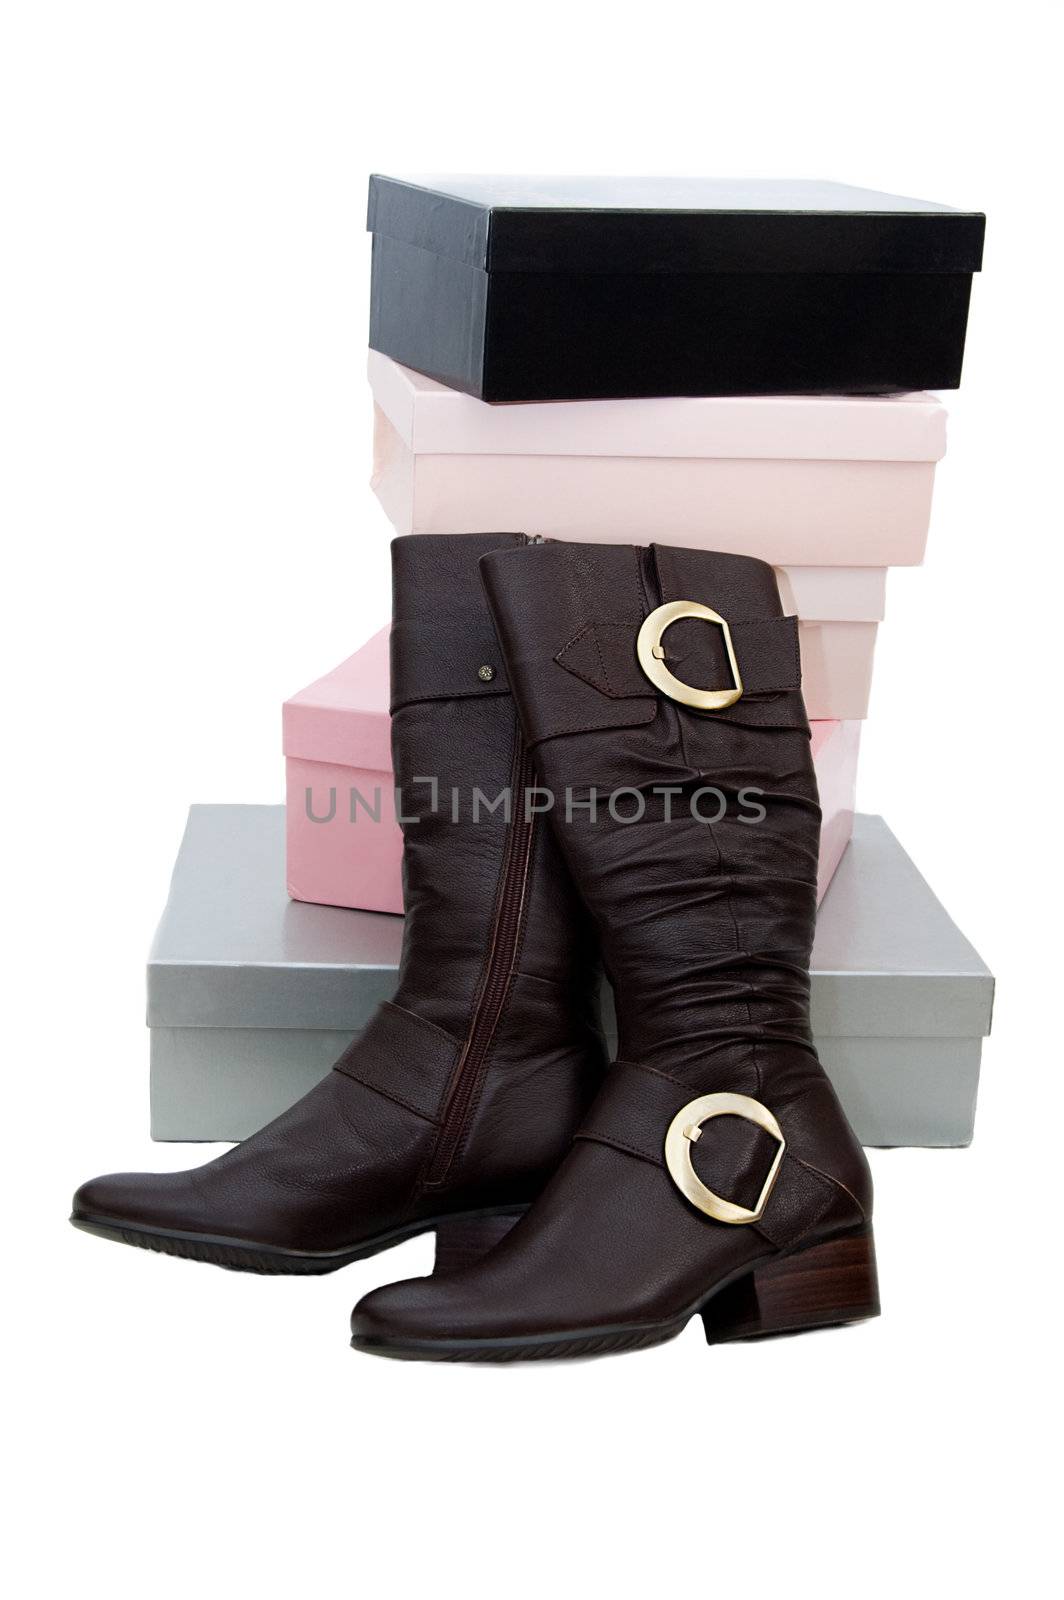 Pair of brown winter woman boots and many boxes over white